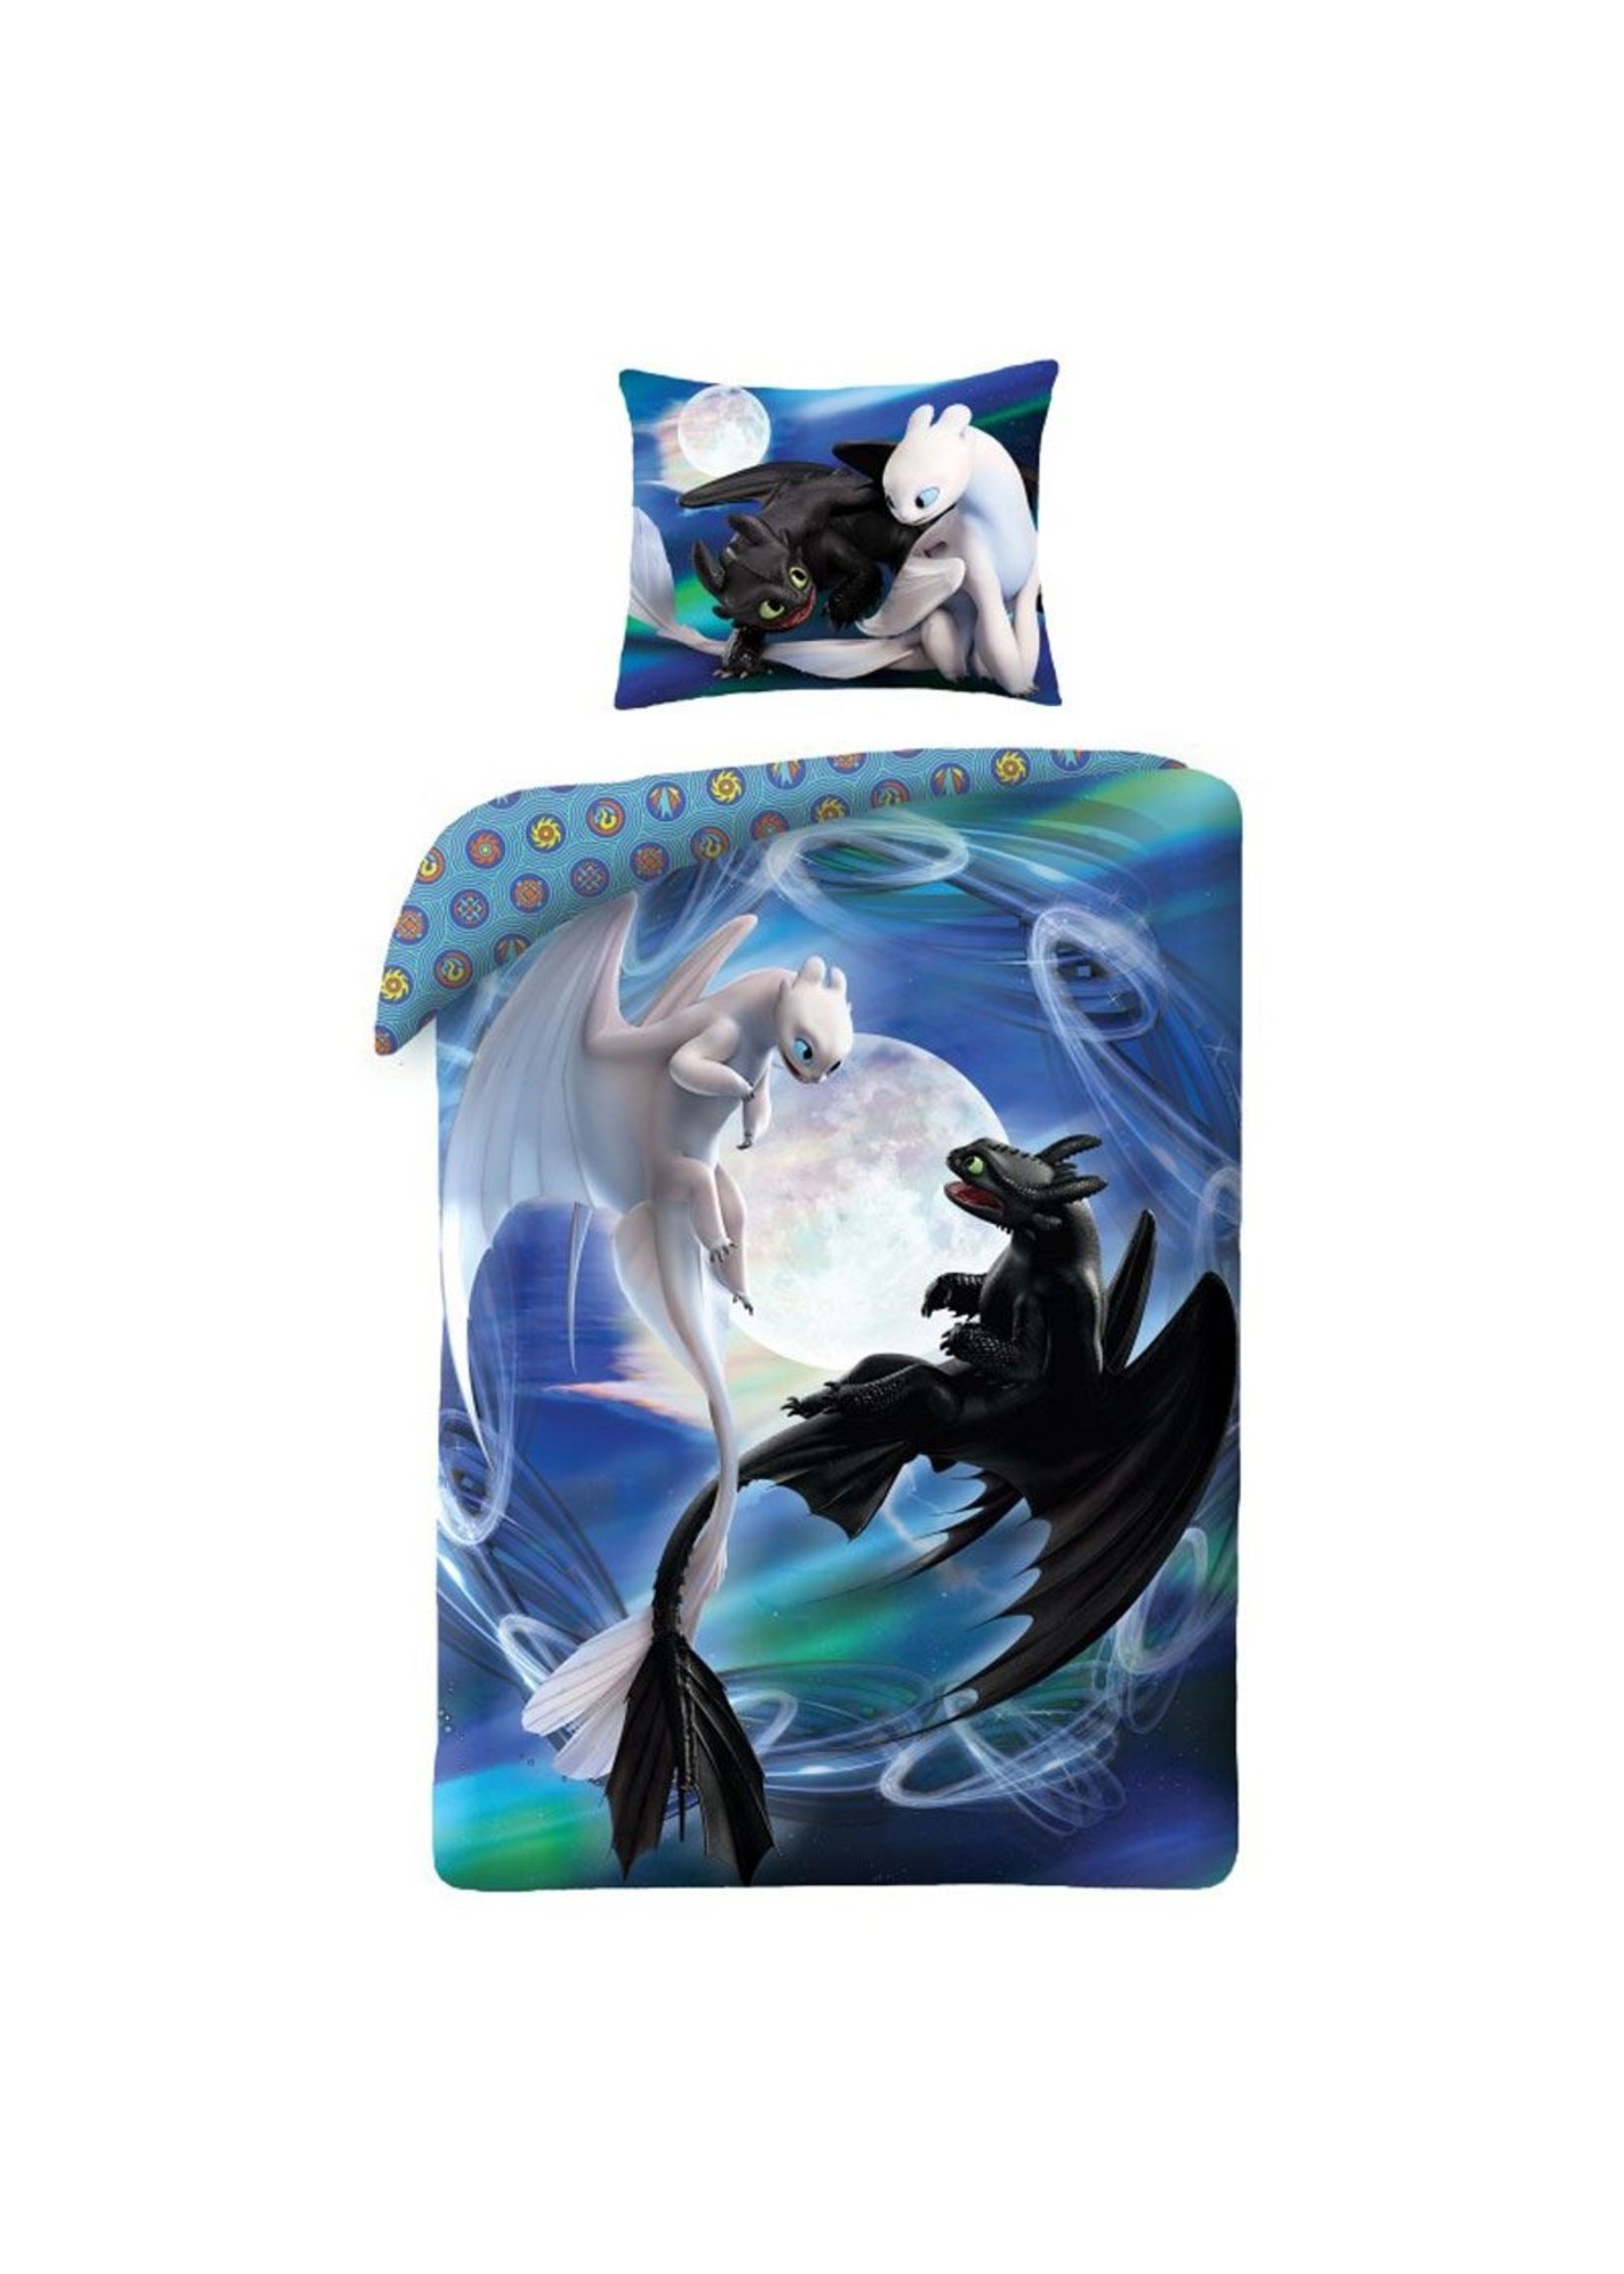 Dreamworks How to Train your Dragon Duvet Set Toothless & Fury